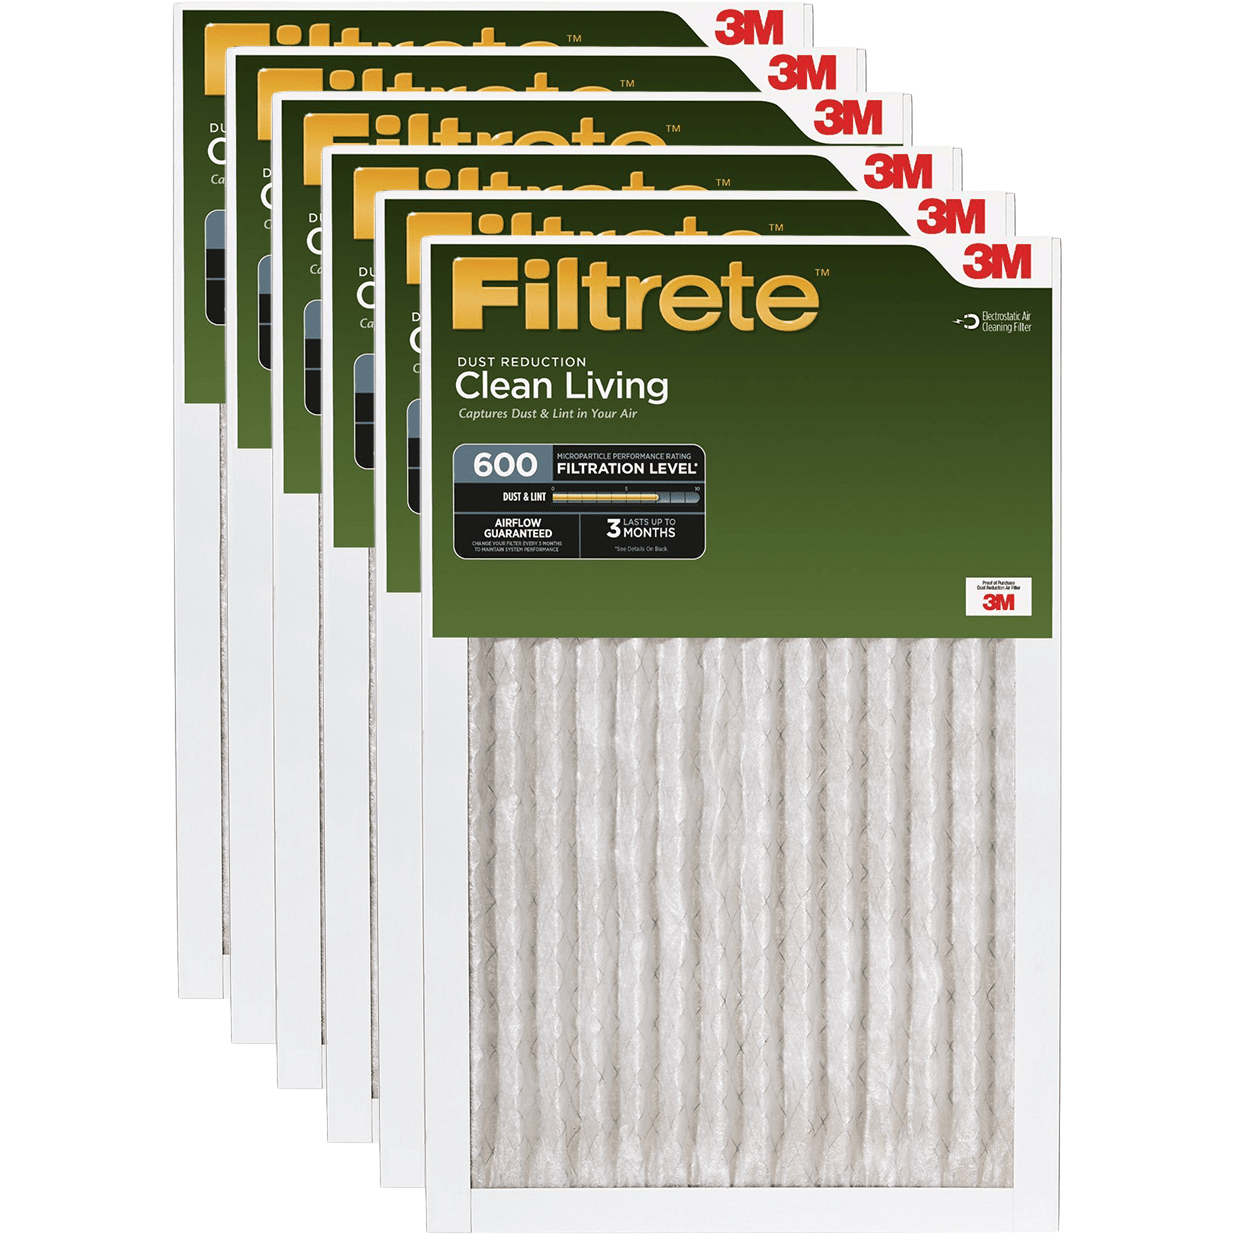 3m Filtrete Clean Living Dust Reduction Mpr 600 Air Filters 20x30x1 6-pack